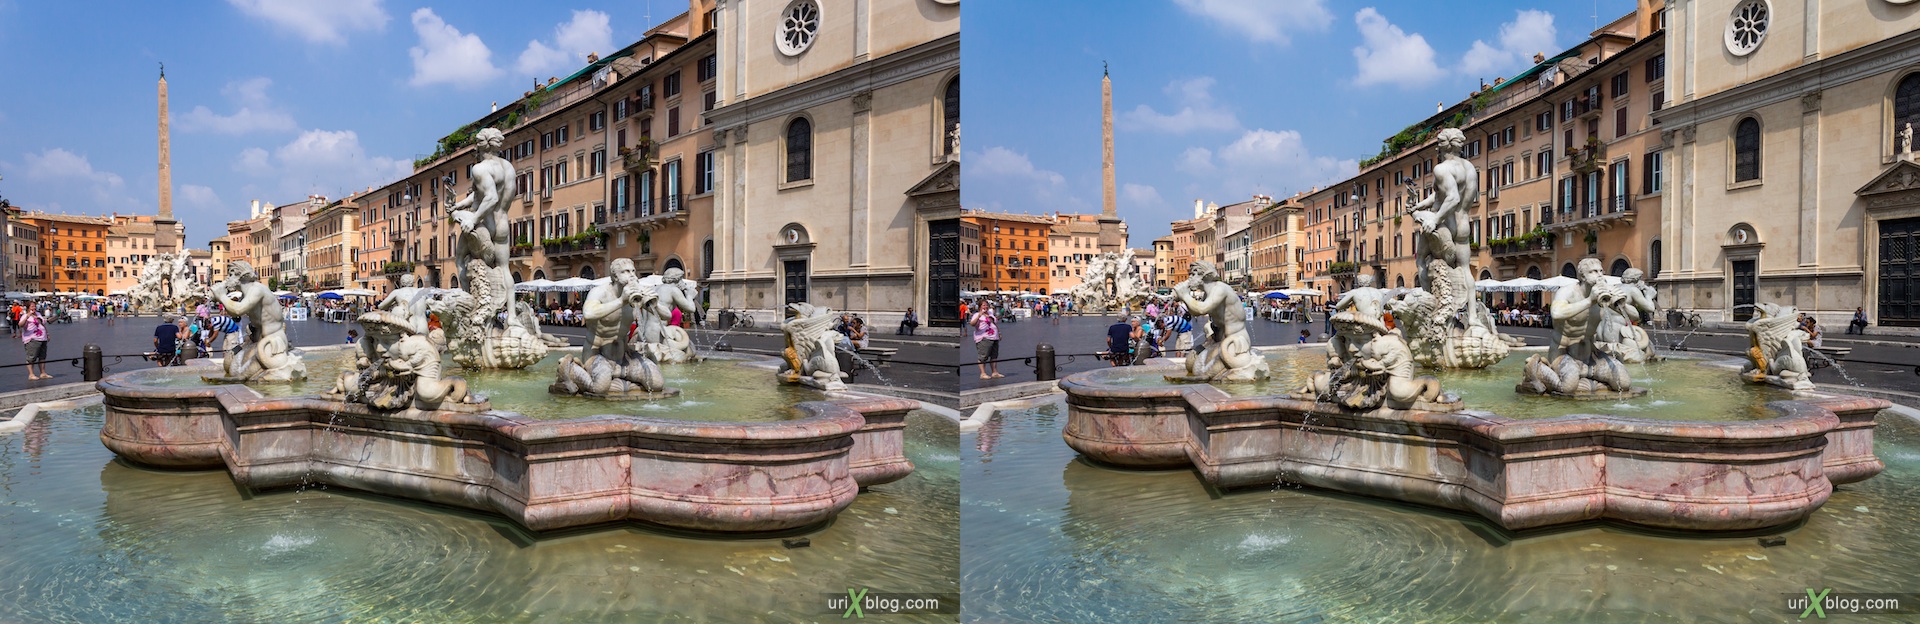 2012, the Moor fountain, Piazza Navona, Rome, Italy, 3D, stereo pair, cross-eyed, crossview, cross view stereo pair